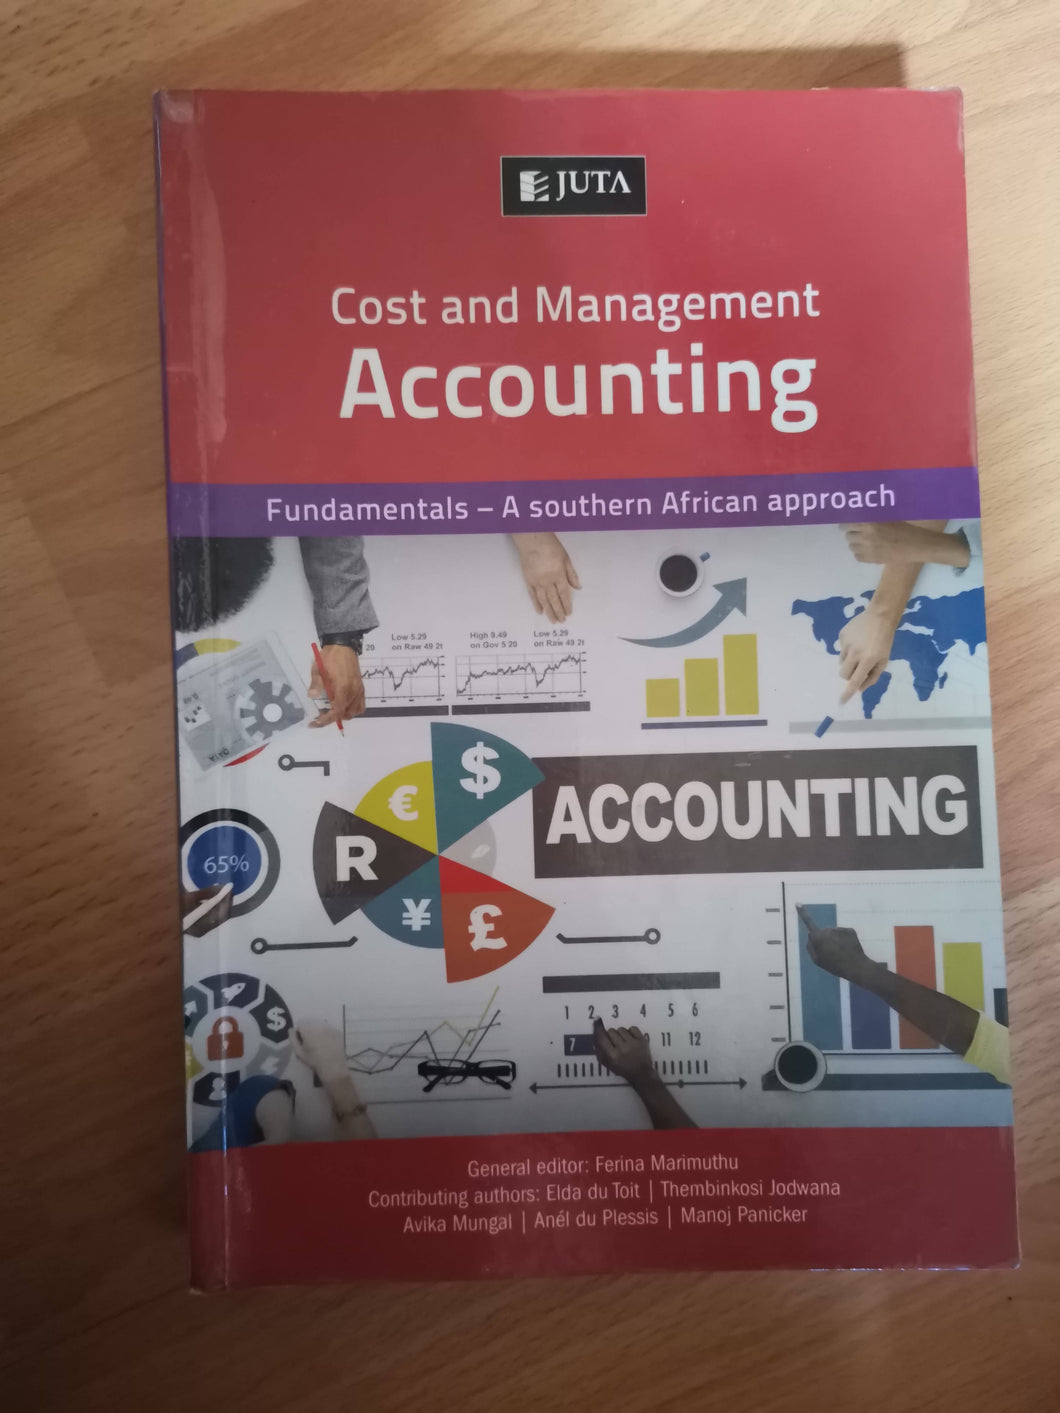 Cost and Management Accounting: Fundamentals - A southern African approach